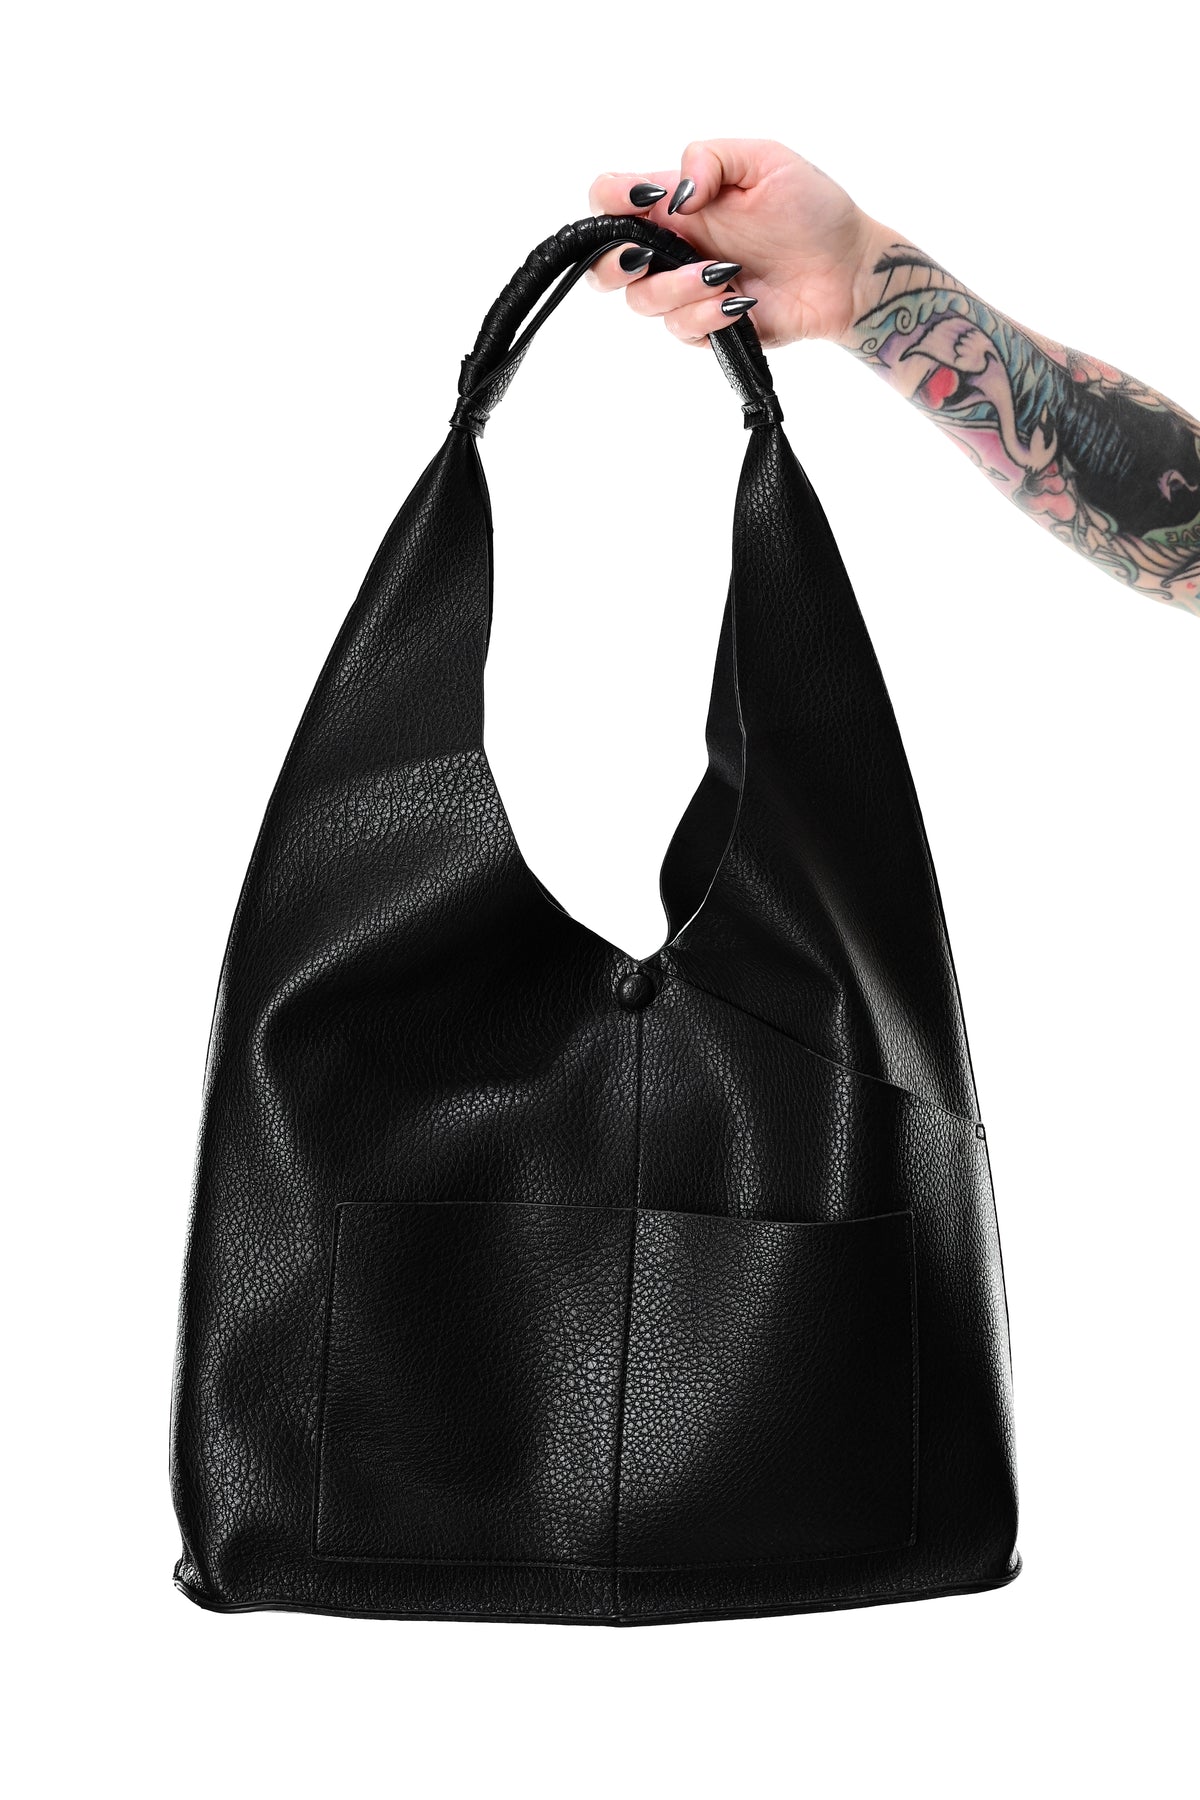 black faux leather slouchy shoulder bag with front pocket and included crossbody bag 